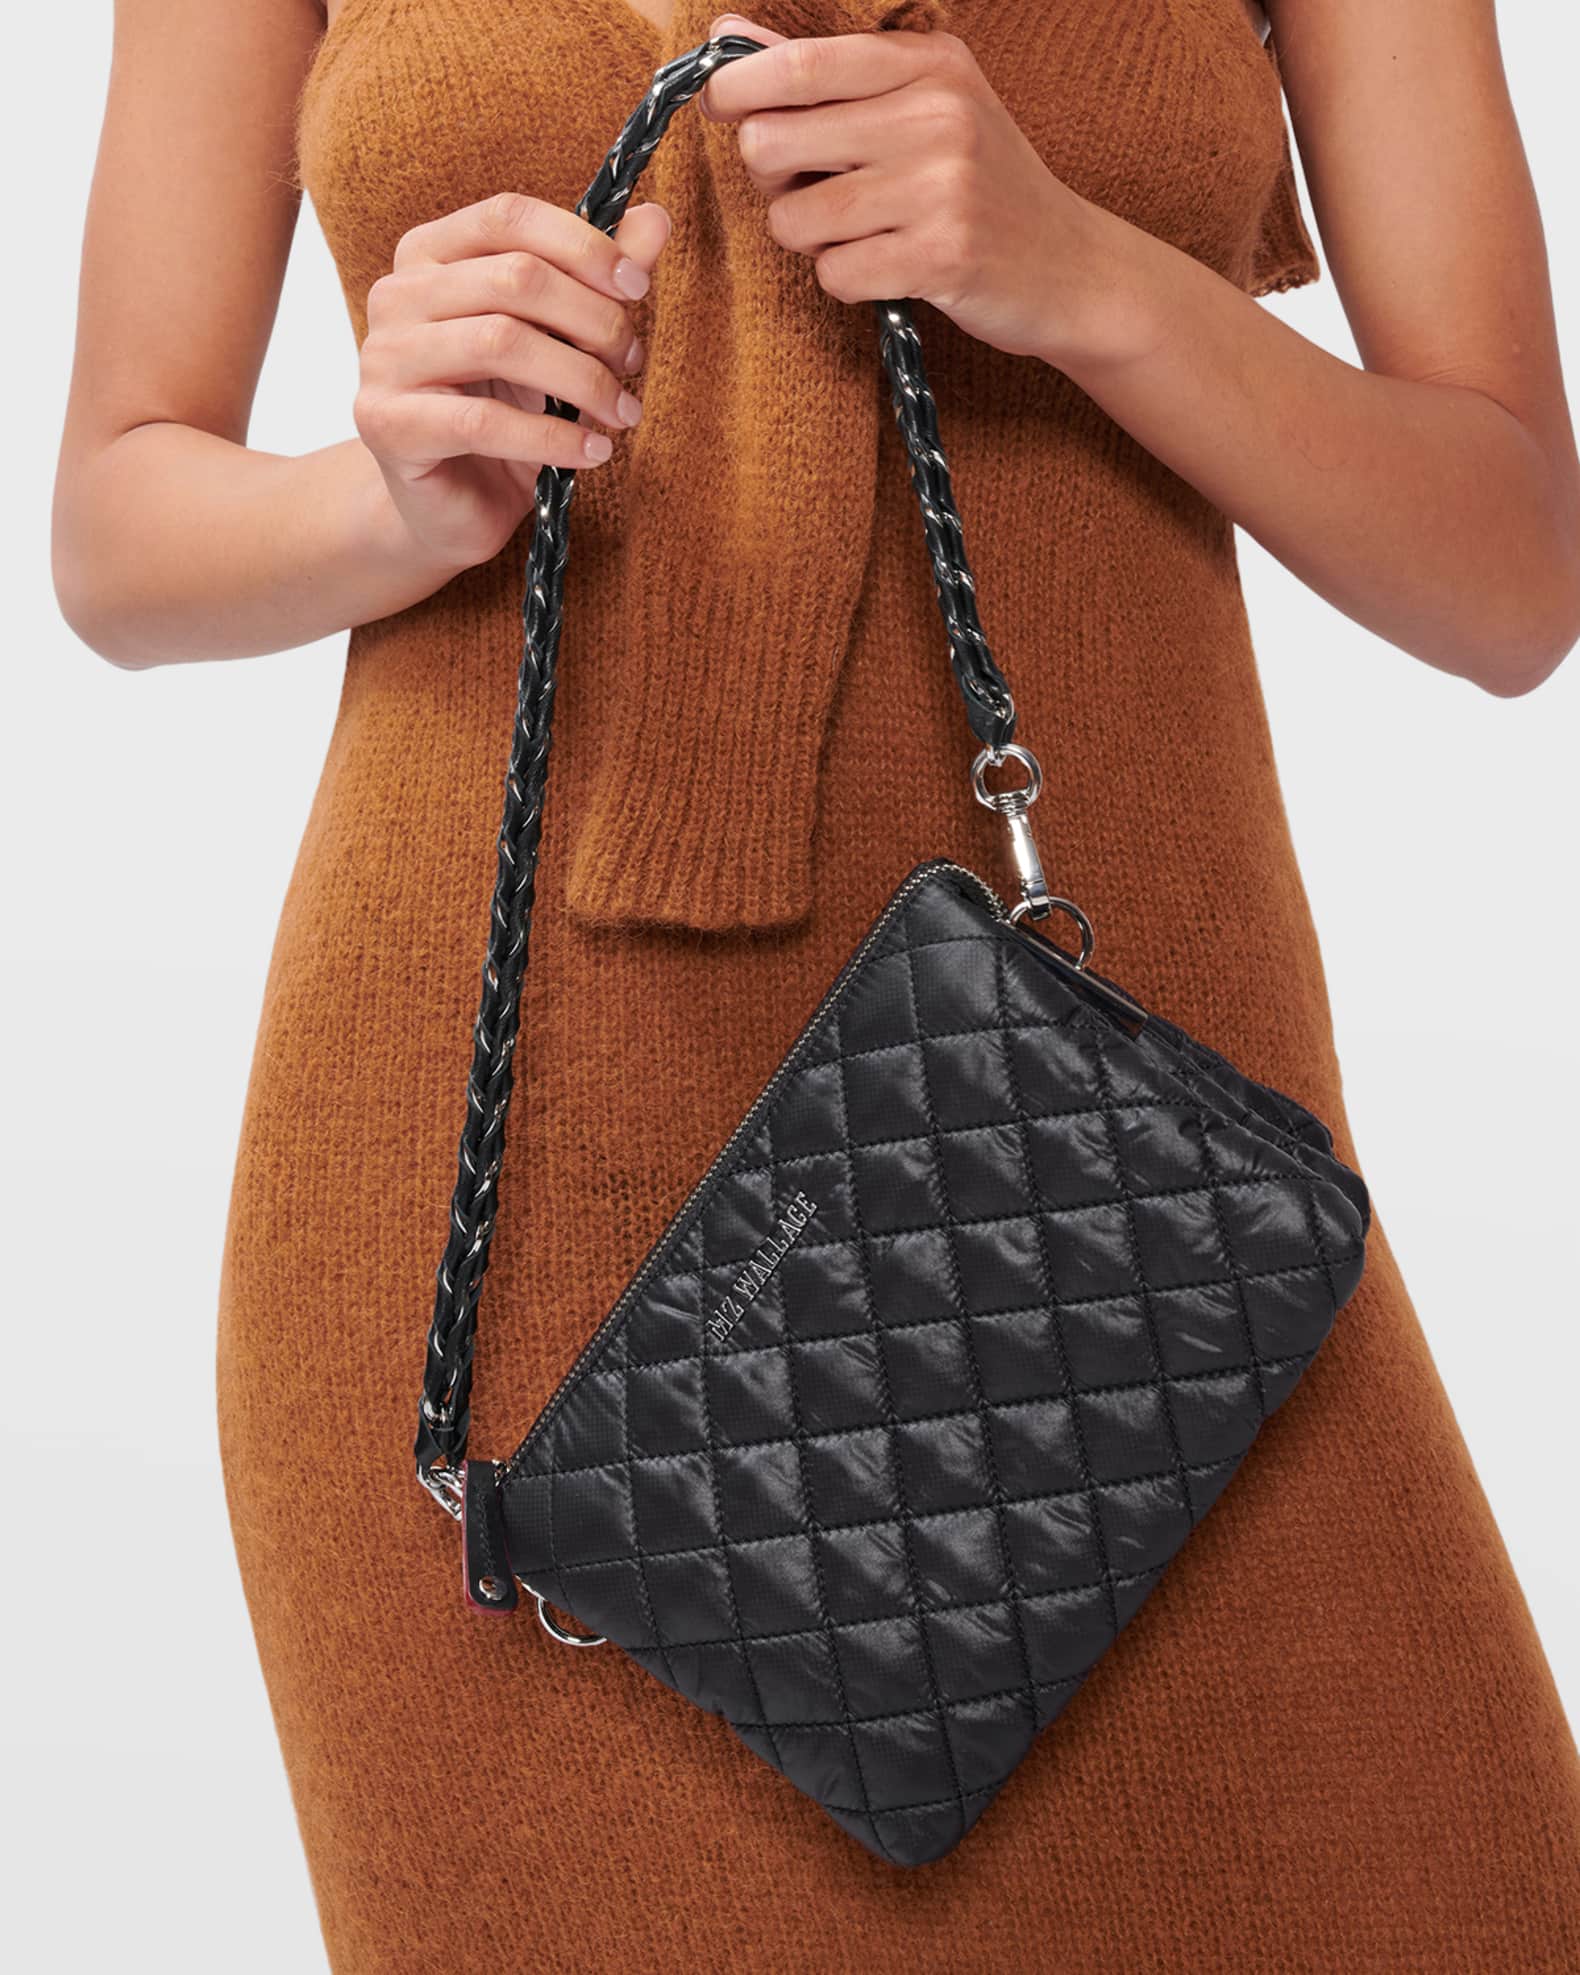 MZ Wallace Pippa Quilted Crossbody Handbag Review - Styled by Science